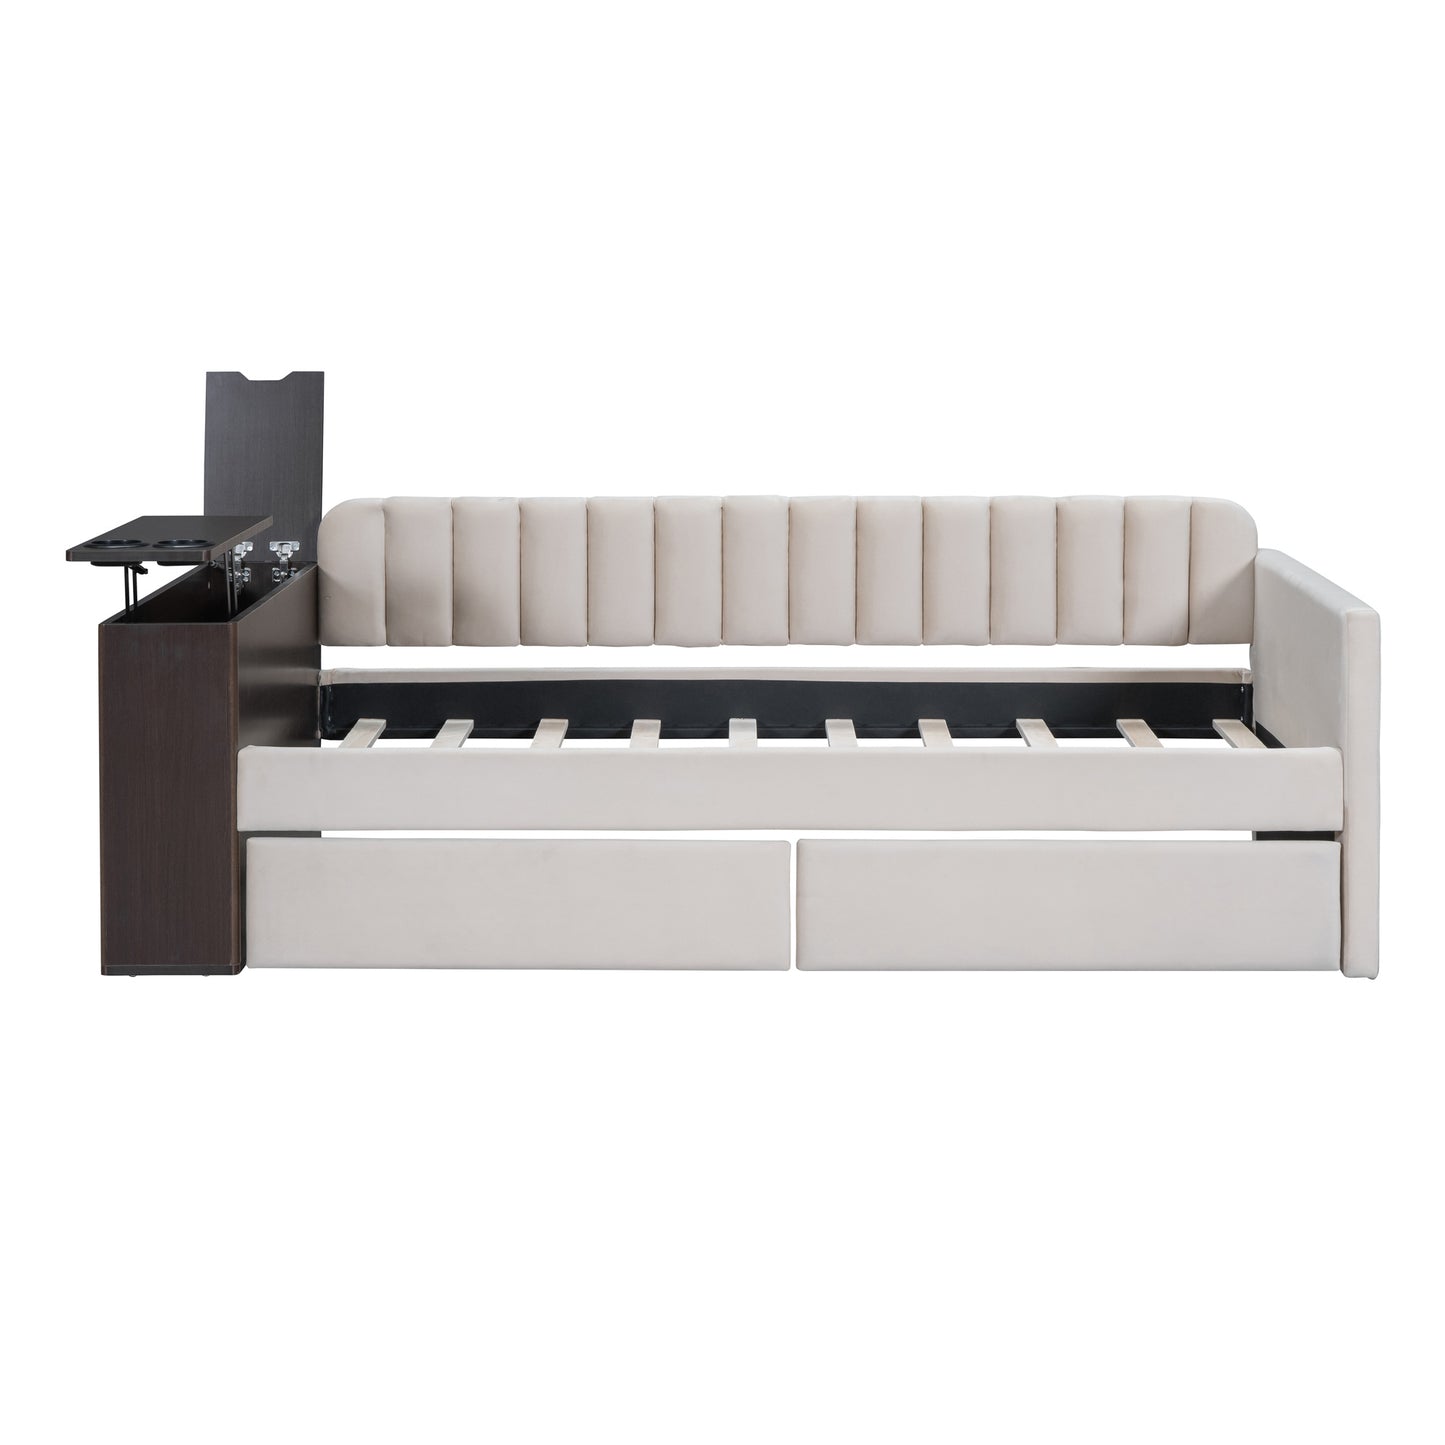 upholstered multi-functional daybed with cup holder and a set of usb ports and sockets, beige